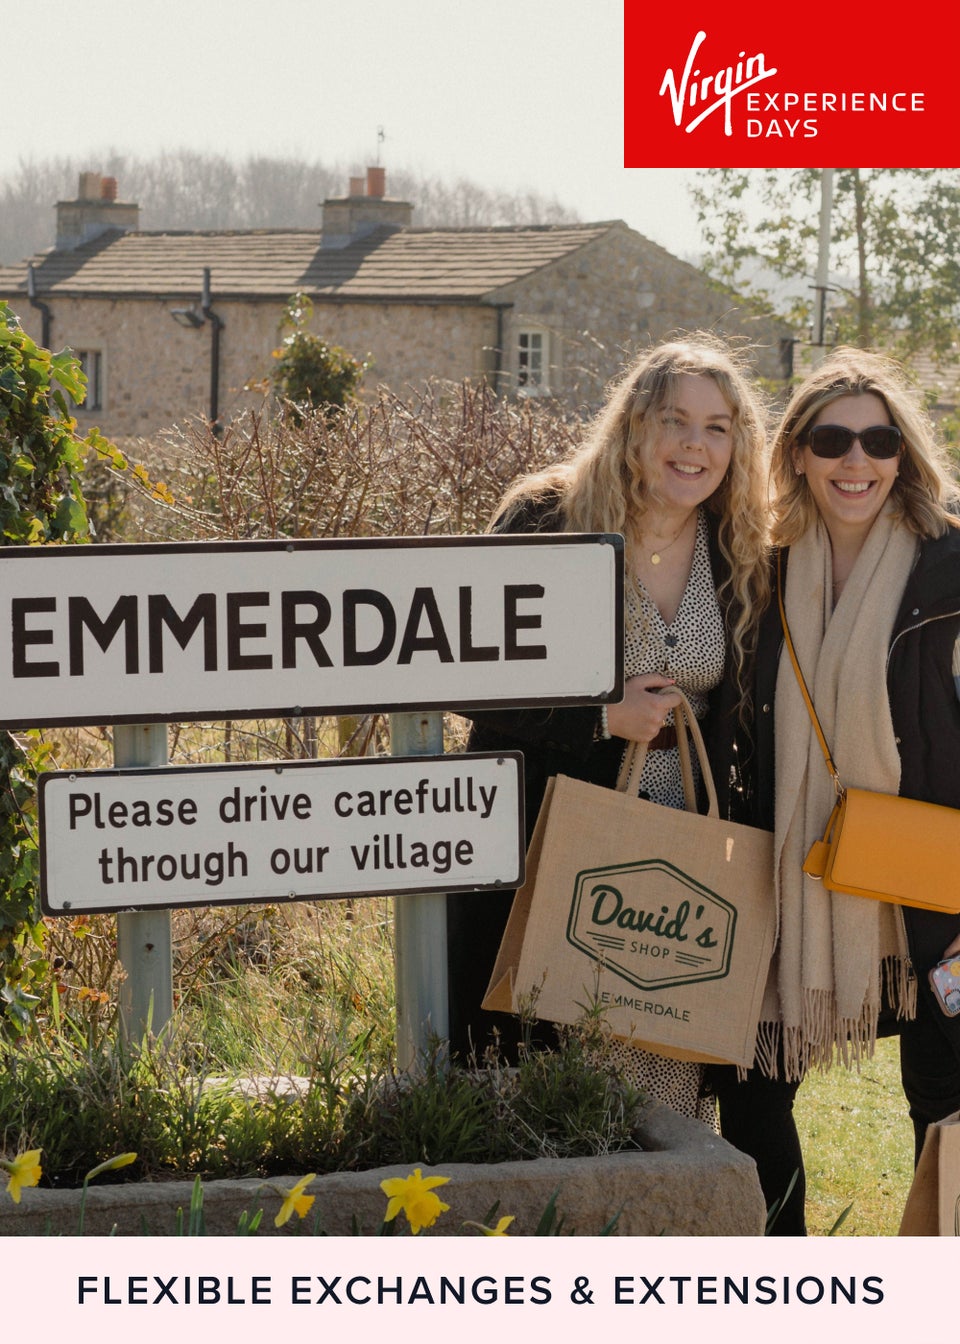 Virgin Experience Days Emmerdale: The Village Tour for Two